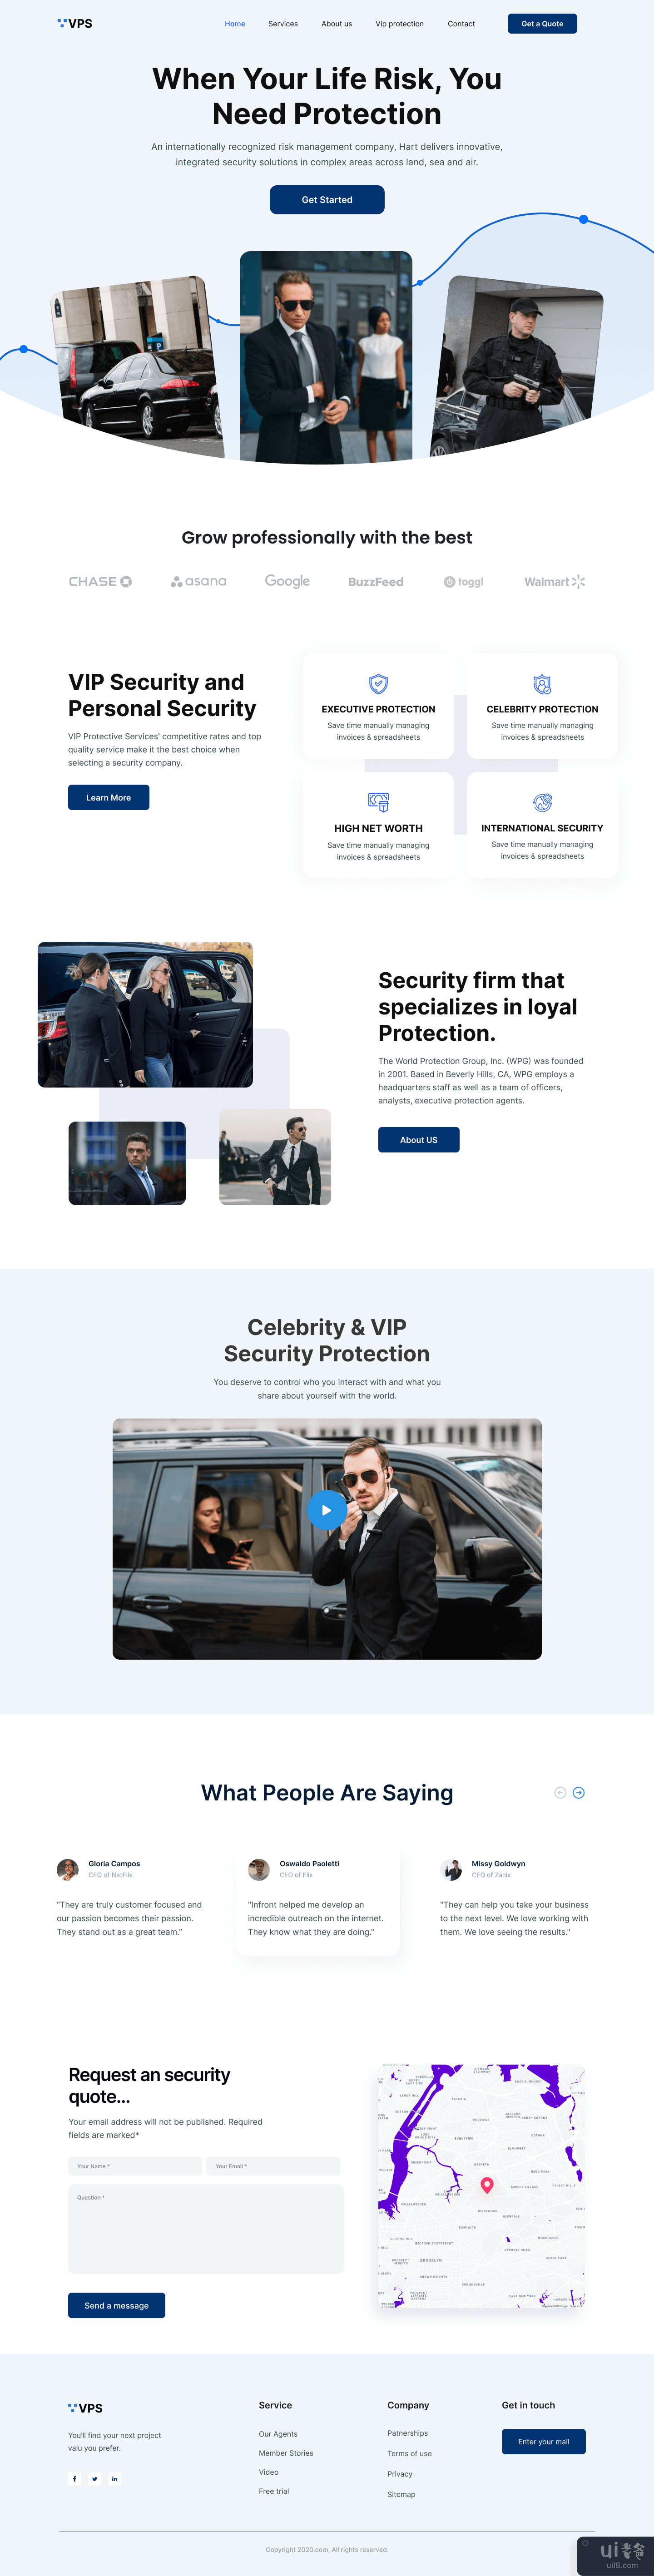 VIP保护和安全服务登陆页面(VIP protection & Security Service landing page)插图1